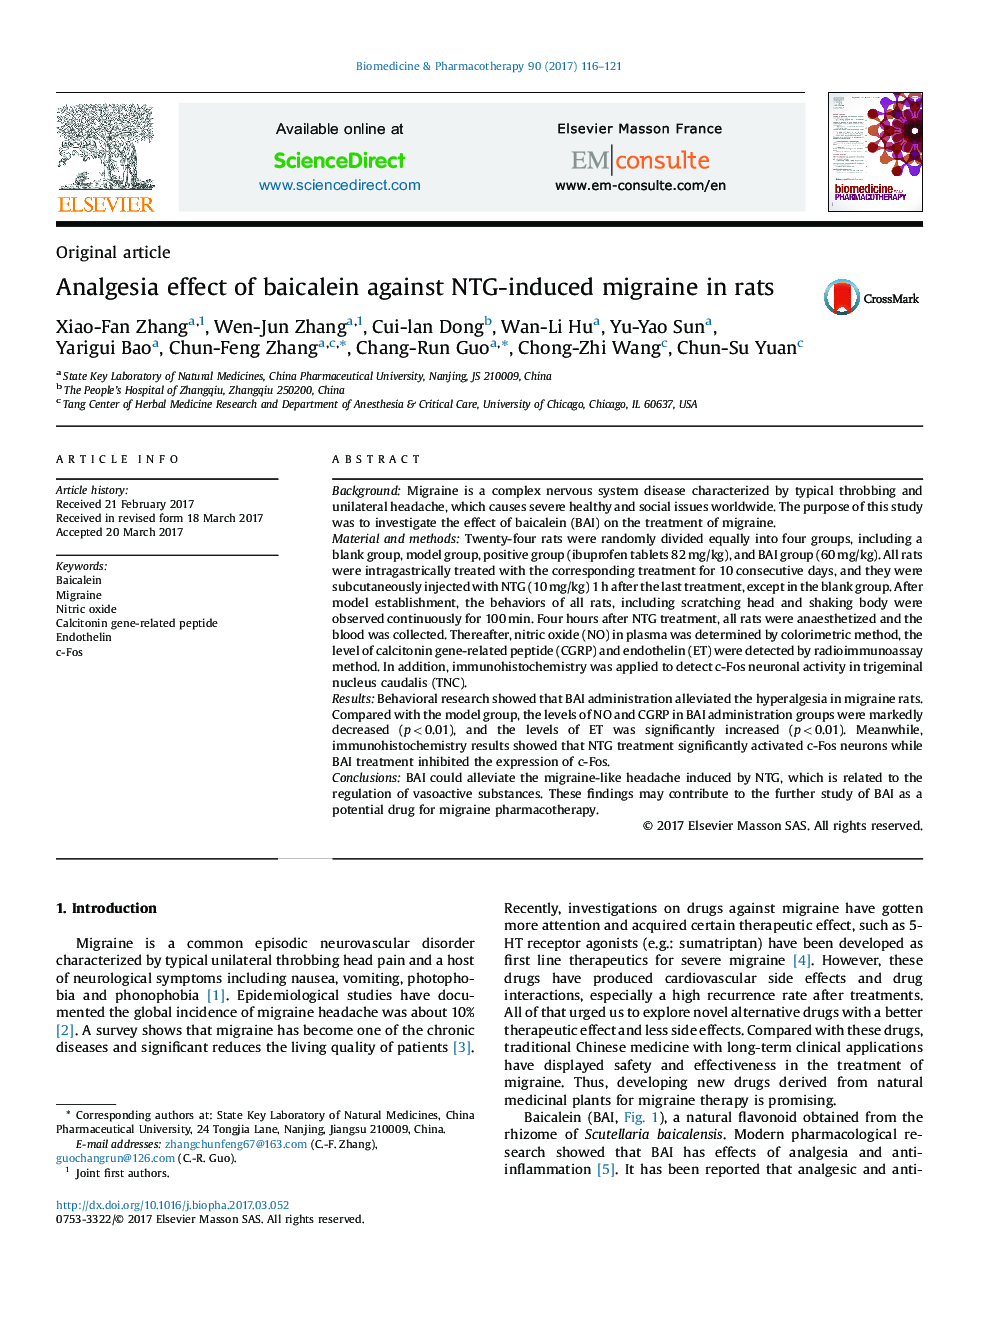 Analgesia effect of baicalein against NTG-induced migraine in rats